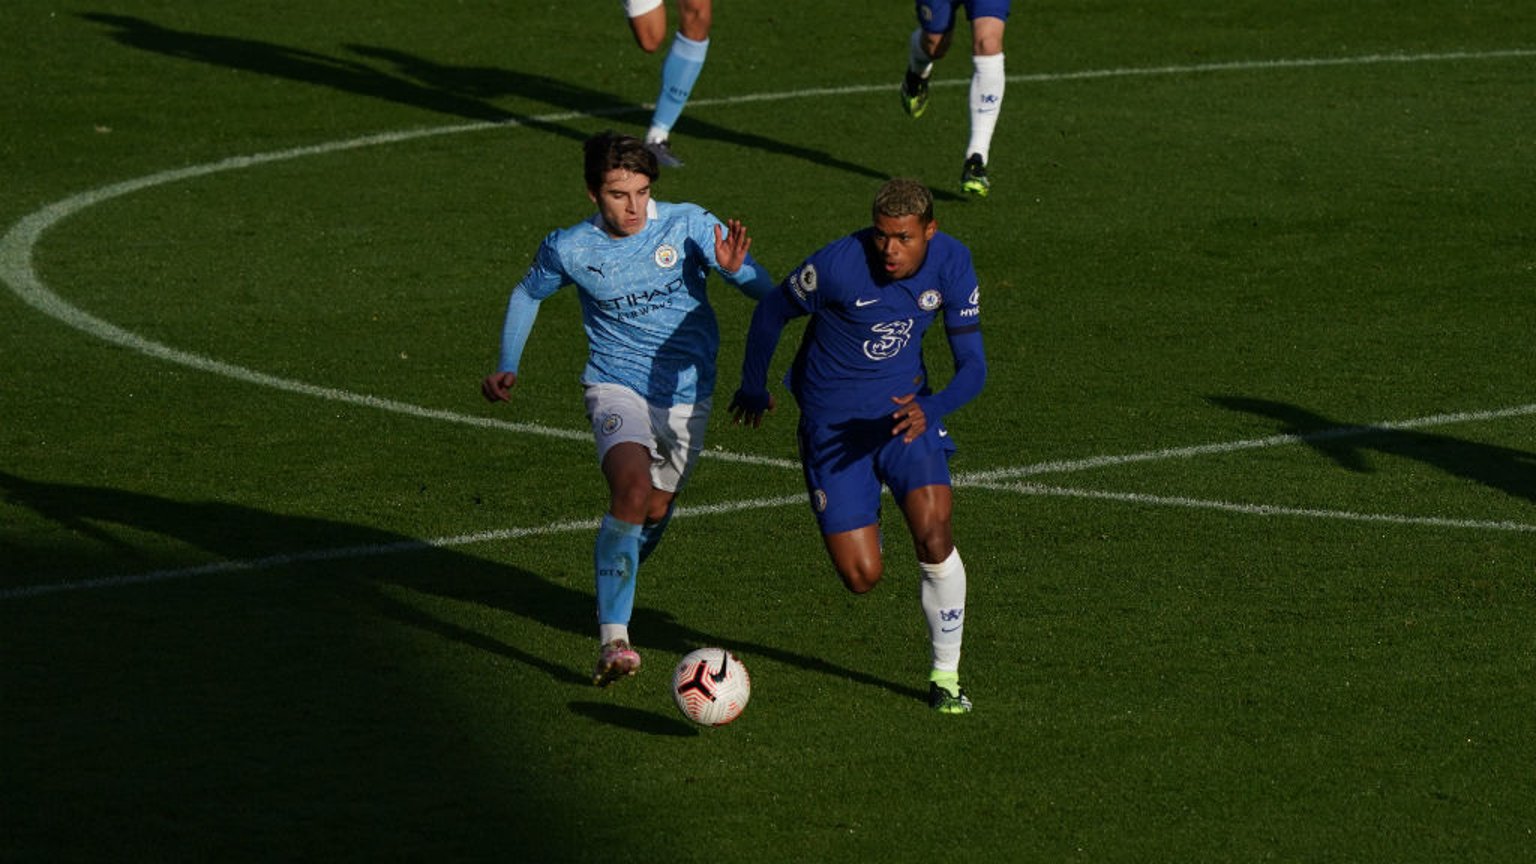 FORWARD MARCH: Adrian Bernabe looks to get City's EDS on the front foot against Chelsea Under-23s